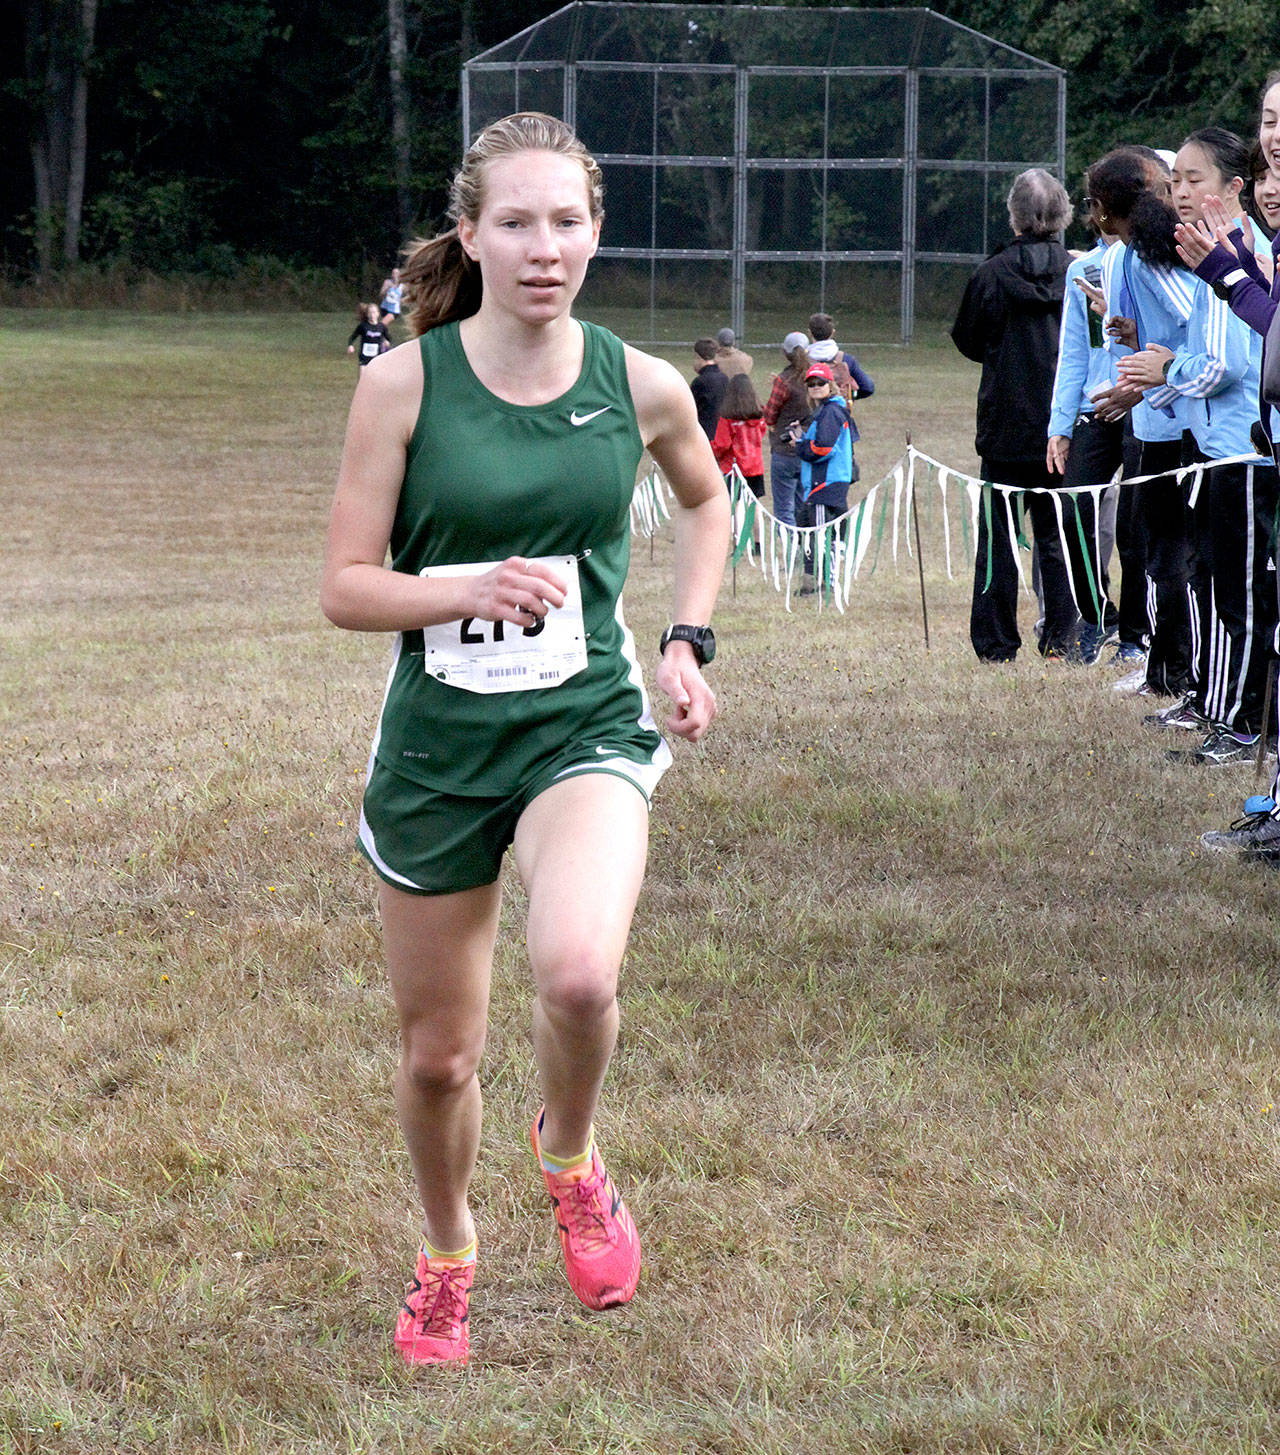 Port Angeles Roughrider Lauren Larson wins the girls’ varsity Salt Creek Invitational with a time of 18:36.22. (Dave Logan/for Peninsula Daily News)